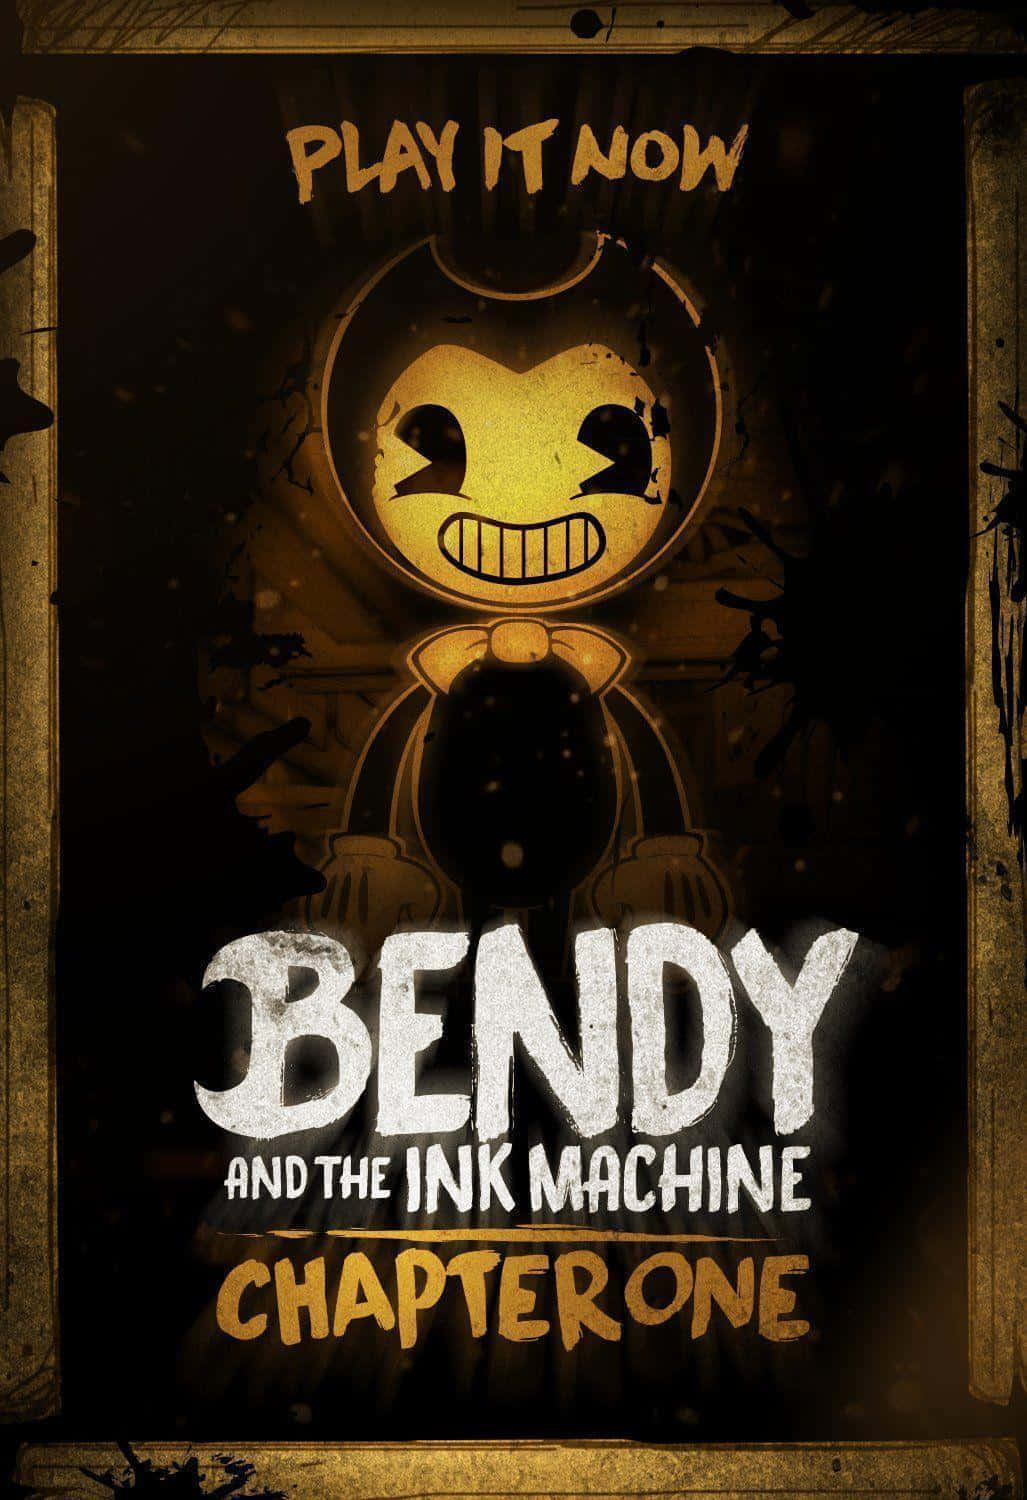 "Explore Mysterious and Foreboding Worlds in Bendy and the Ink Machine."